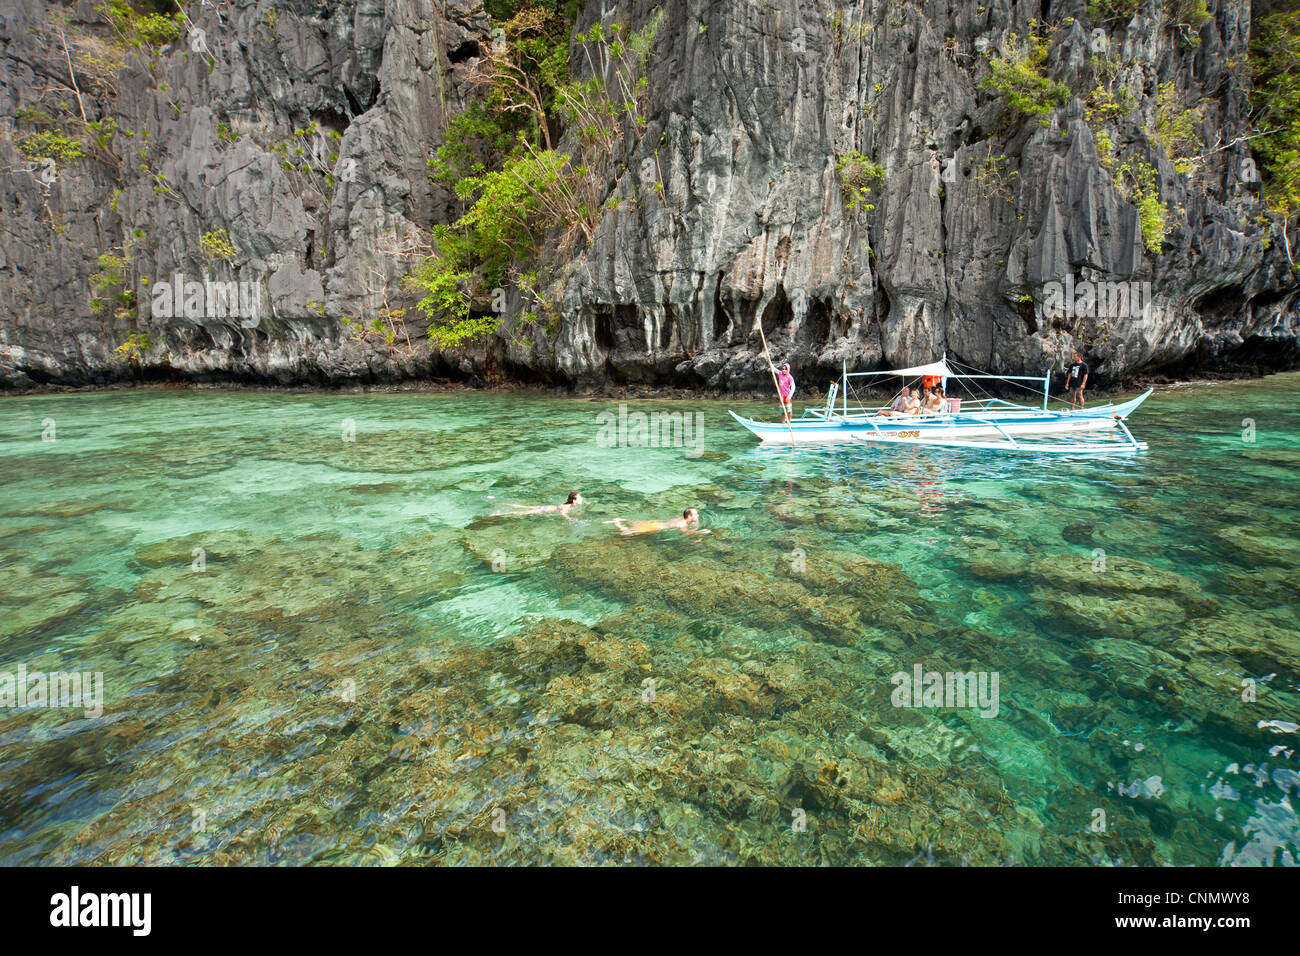 typical outrigger boat and tourists snorkelling at the small lagoon of Miniloc Island, El Nido, Palawan, Philippines, Asia Stock Photo